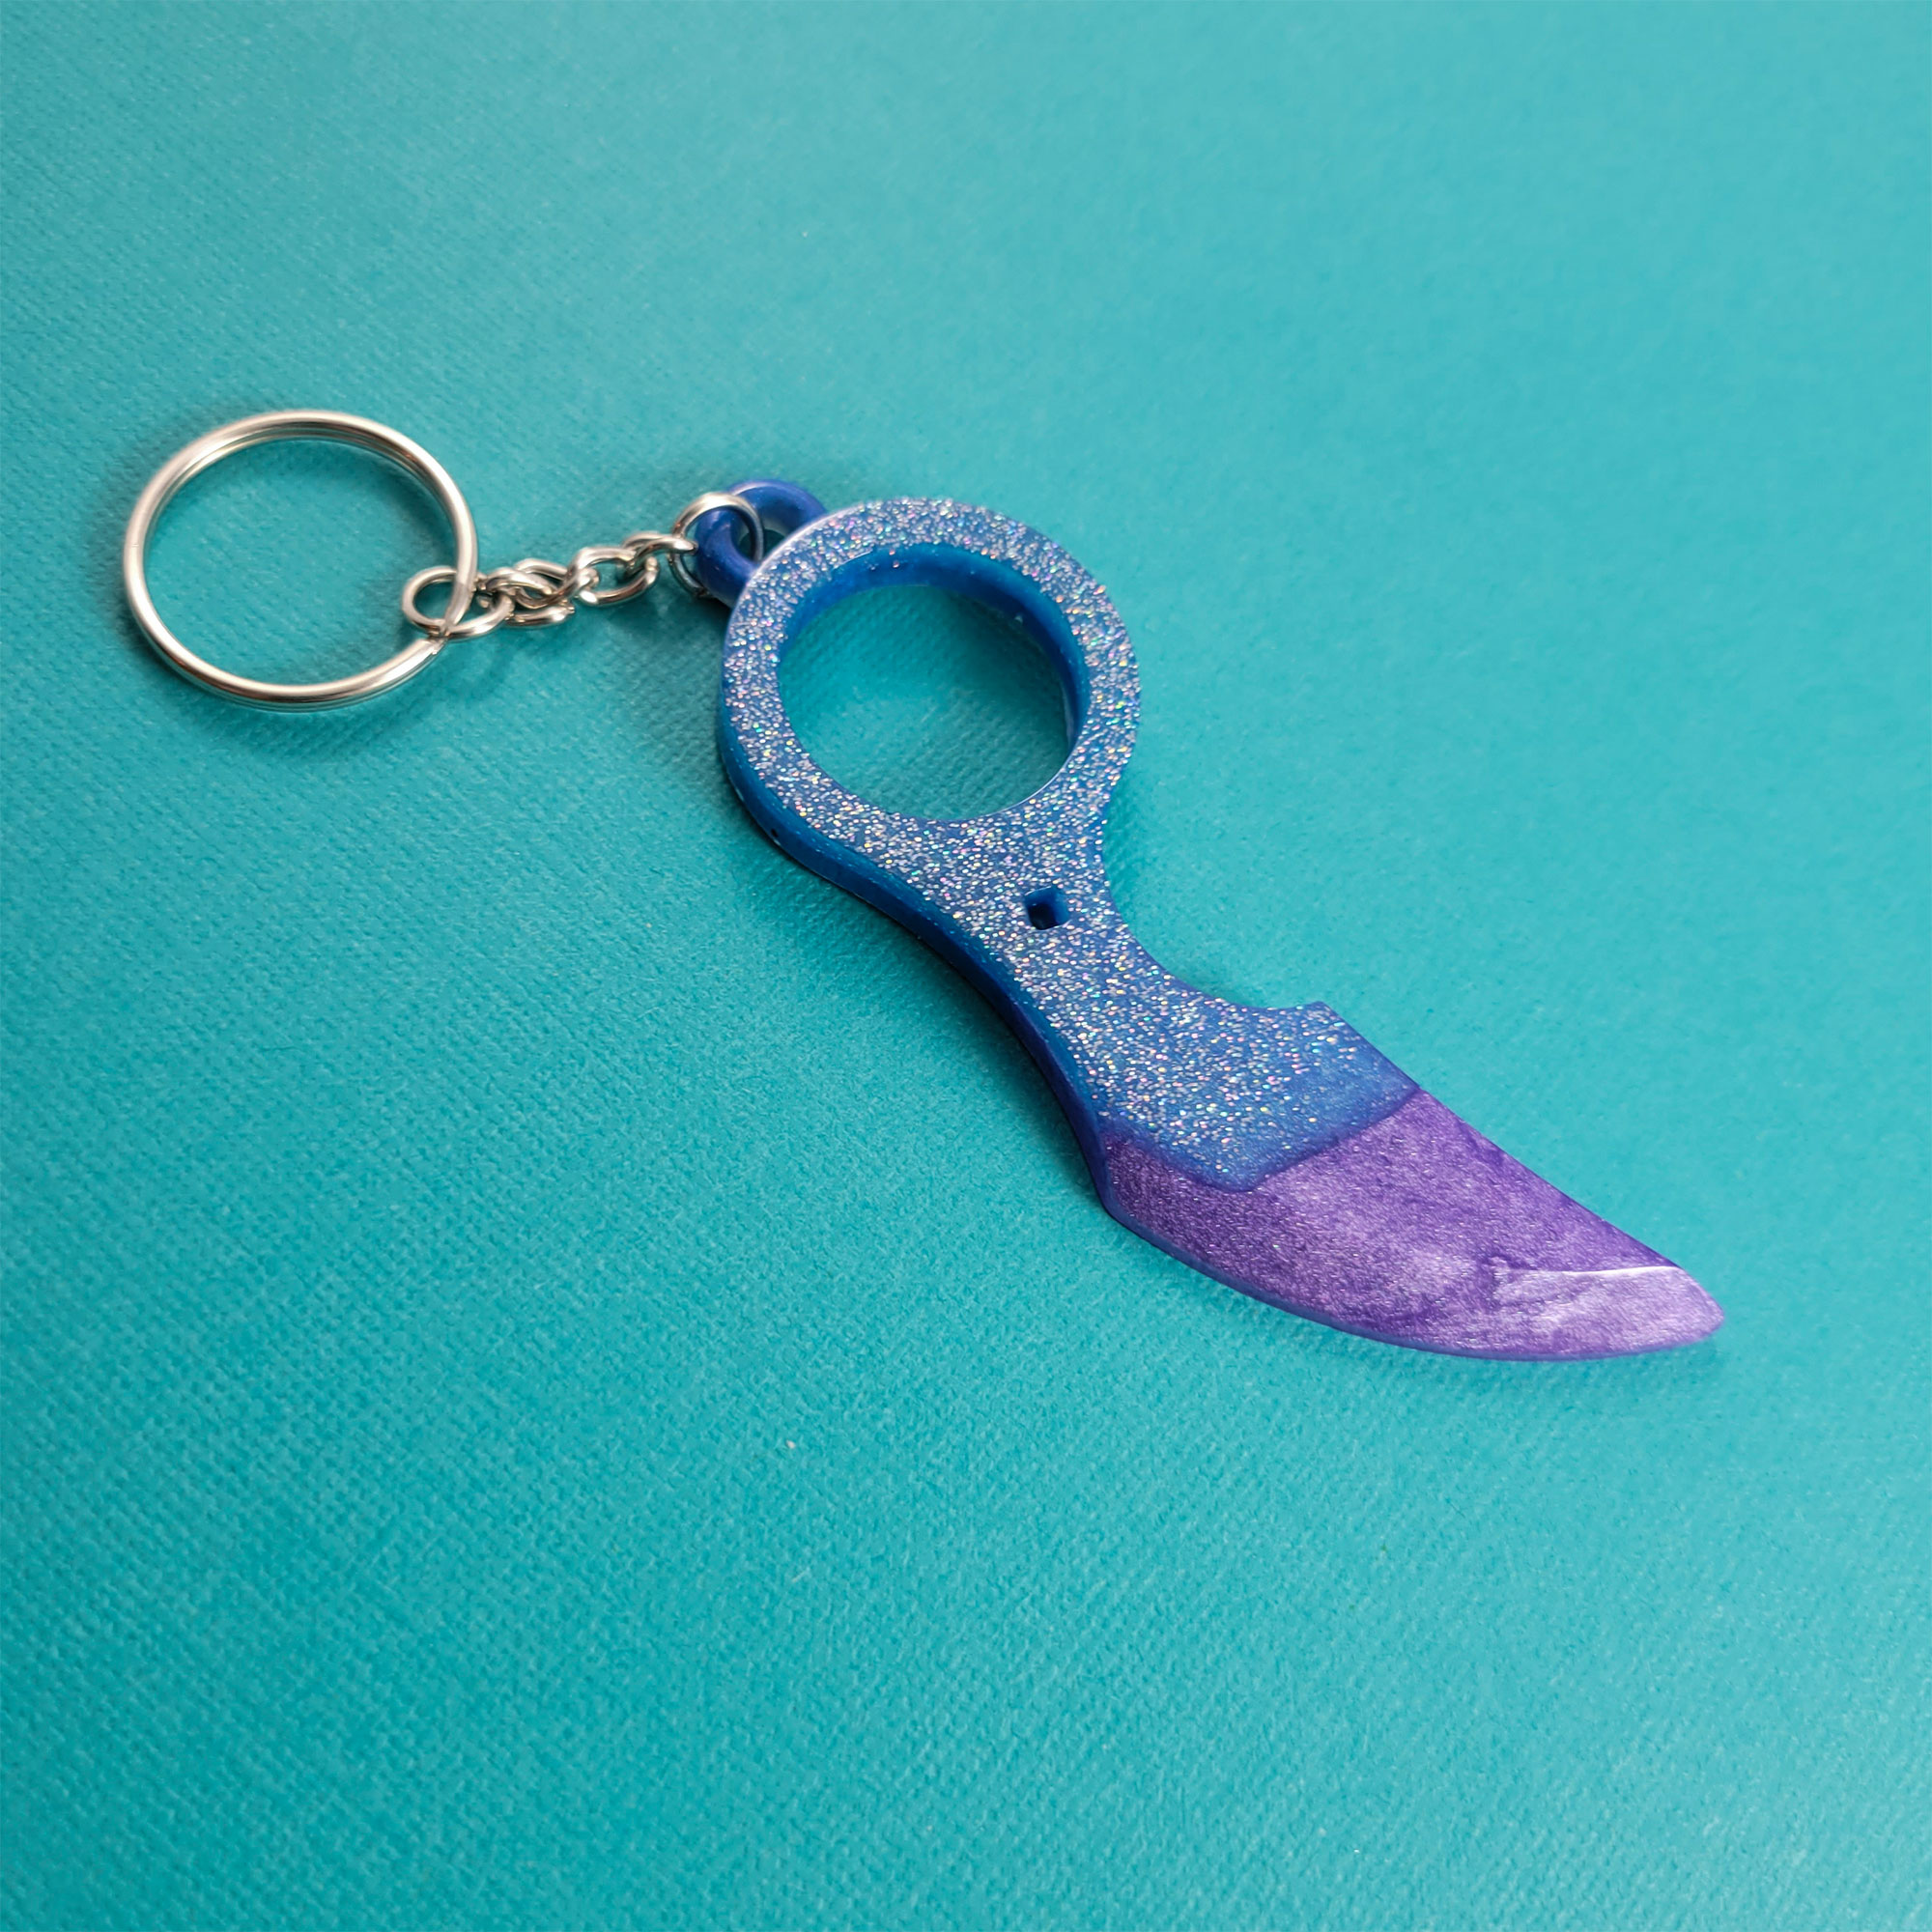 Blue and Purple Claw Safety Keychain by Wilde Designs